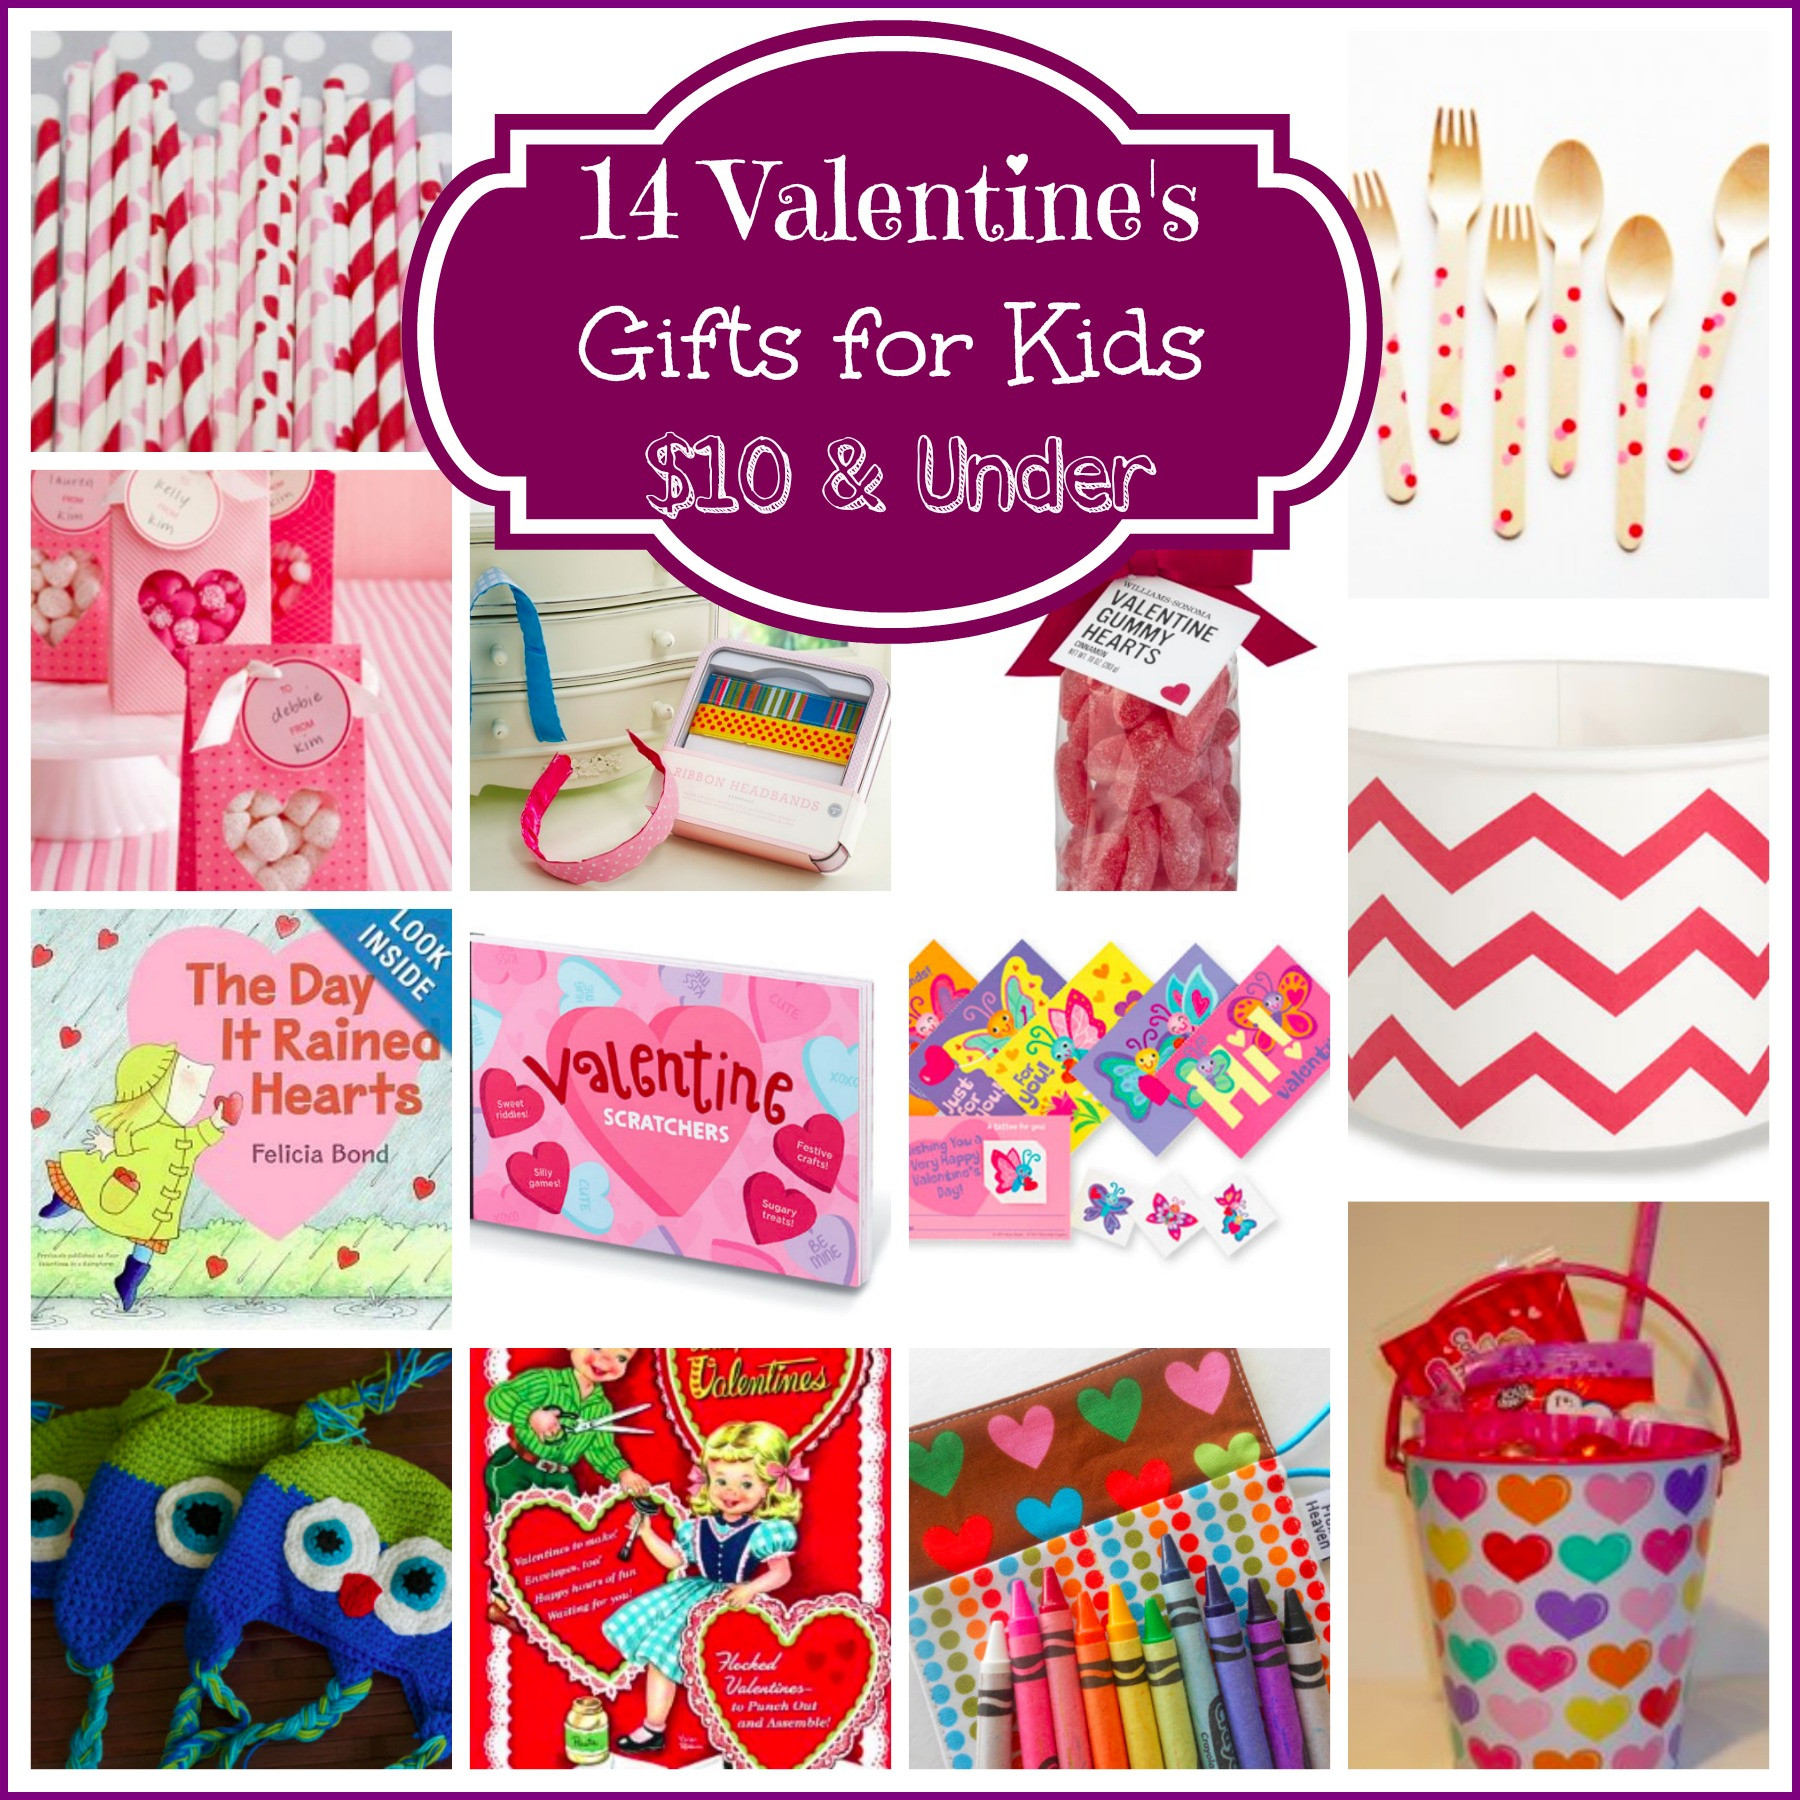 Valentines Gift For Kids
 14 Valentine’s Day Gifts for Kids $10 & Under